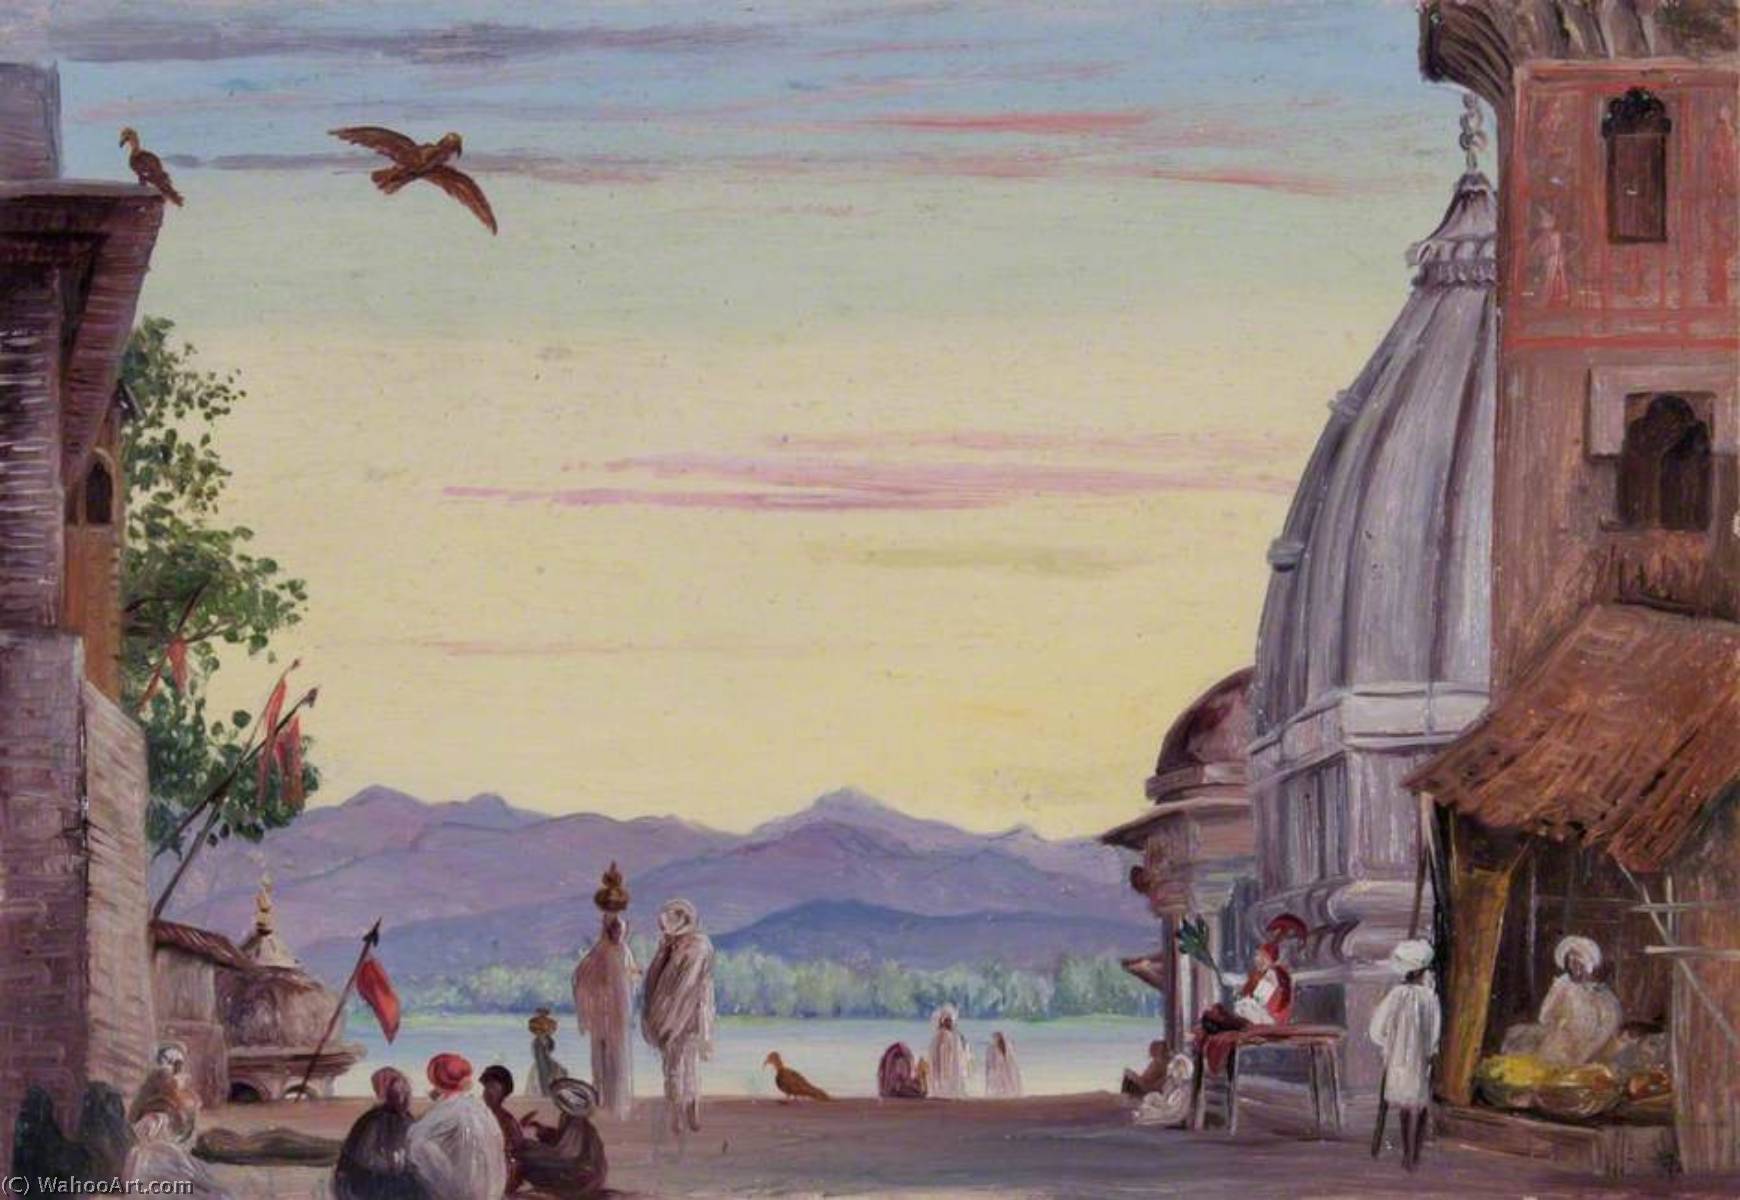 WikiOO.org - Encyclopedia of Fine Arts - Malba, Artwork Marianne North - Top of the Holy Steps, Hurdwar, India